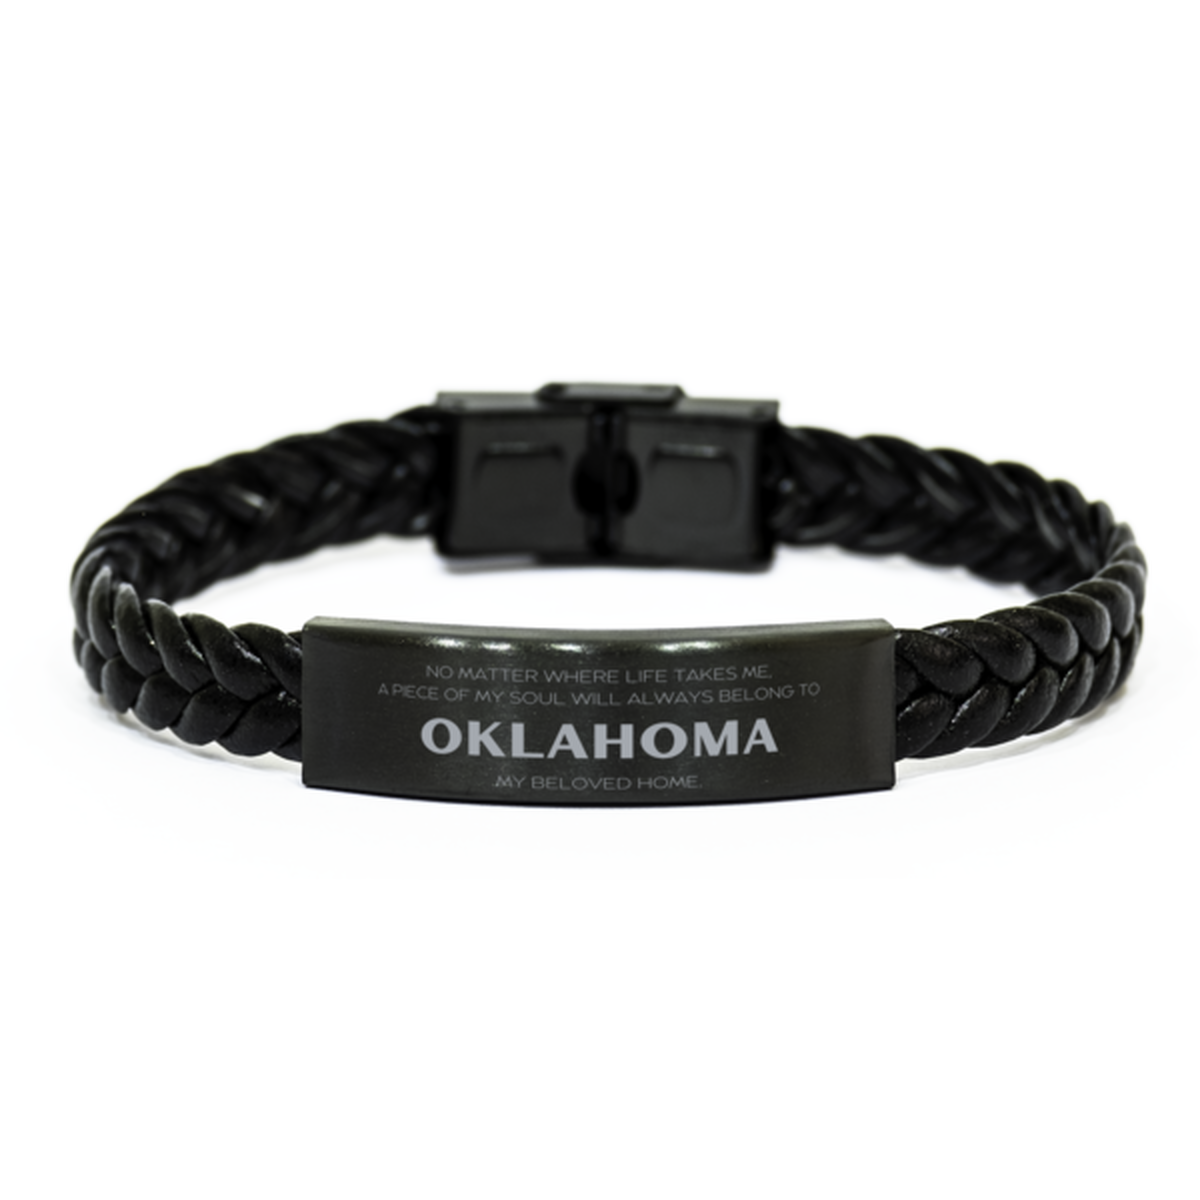 Love Oklahoma State Gifts, My soul will always belong to Oklahoma, Proud Braided Leather Bracelet, Birthday Unique Gifts For Oklahoma Men, Women, Friends